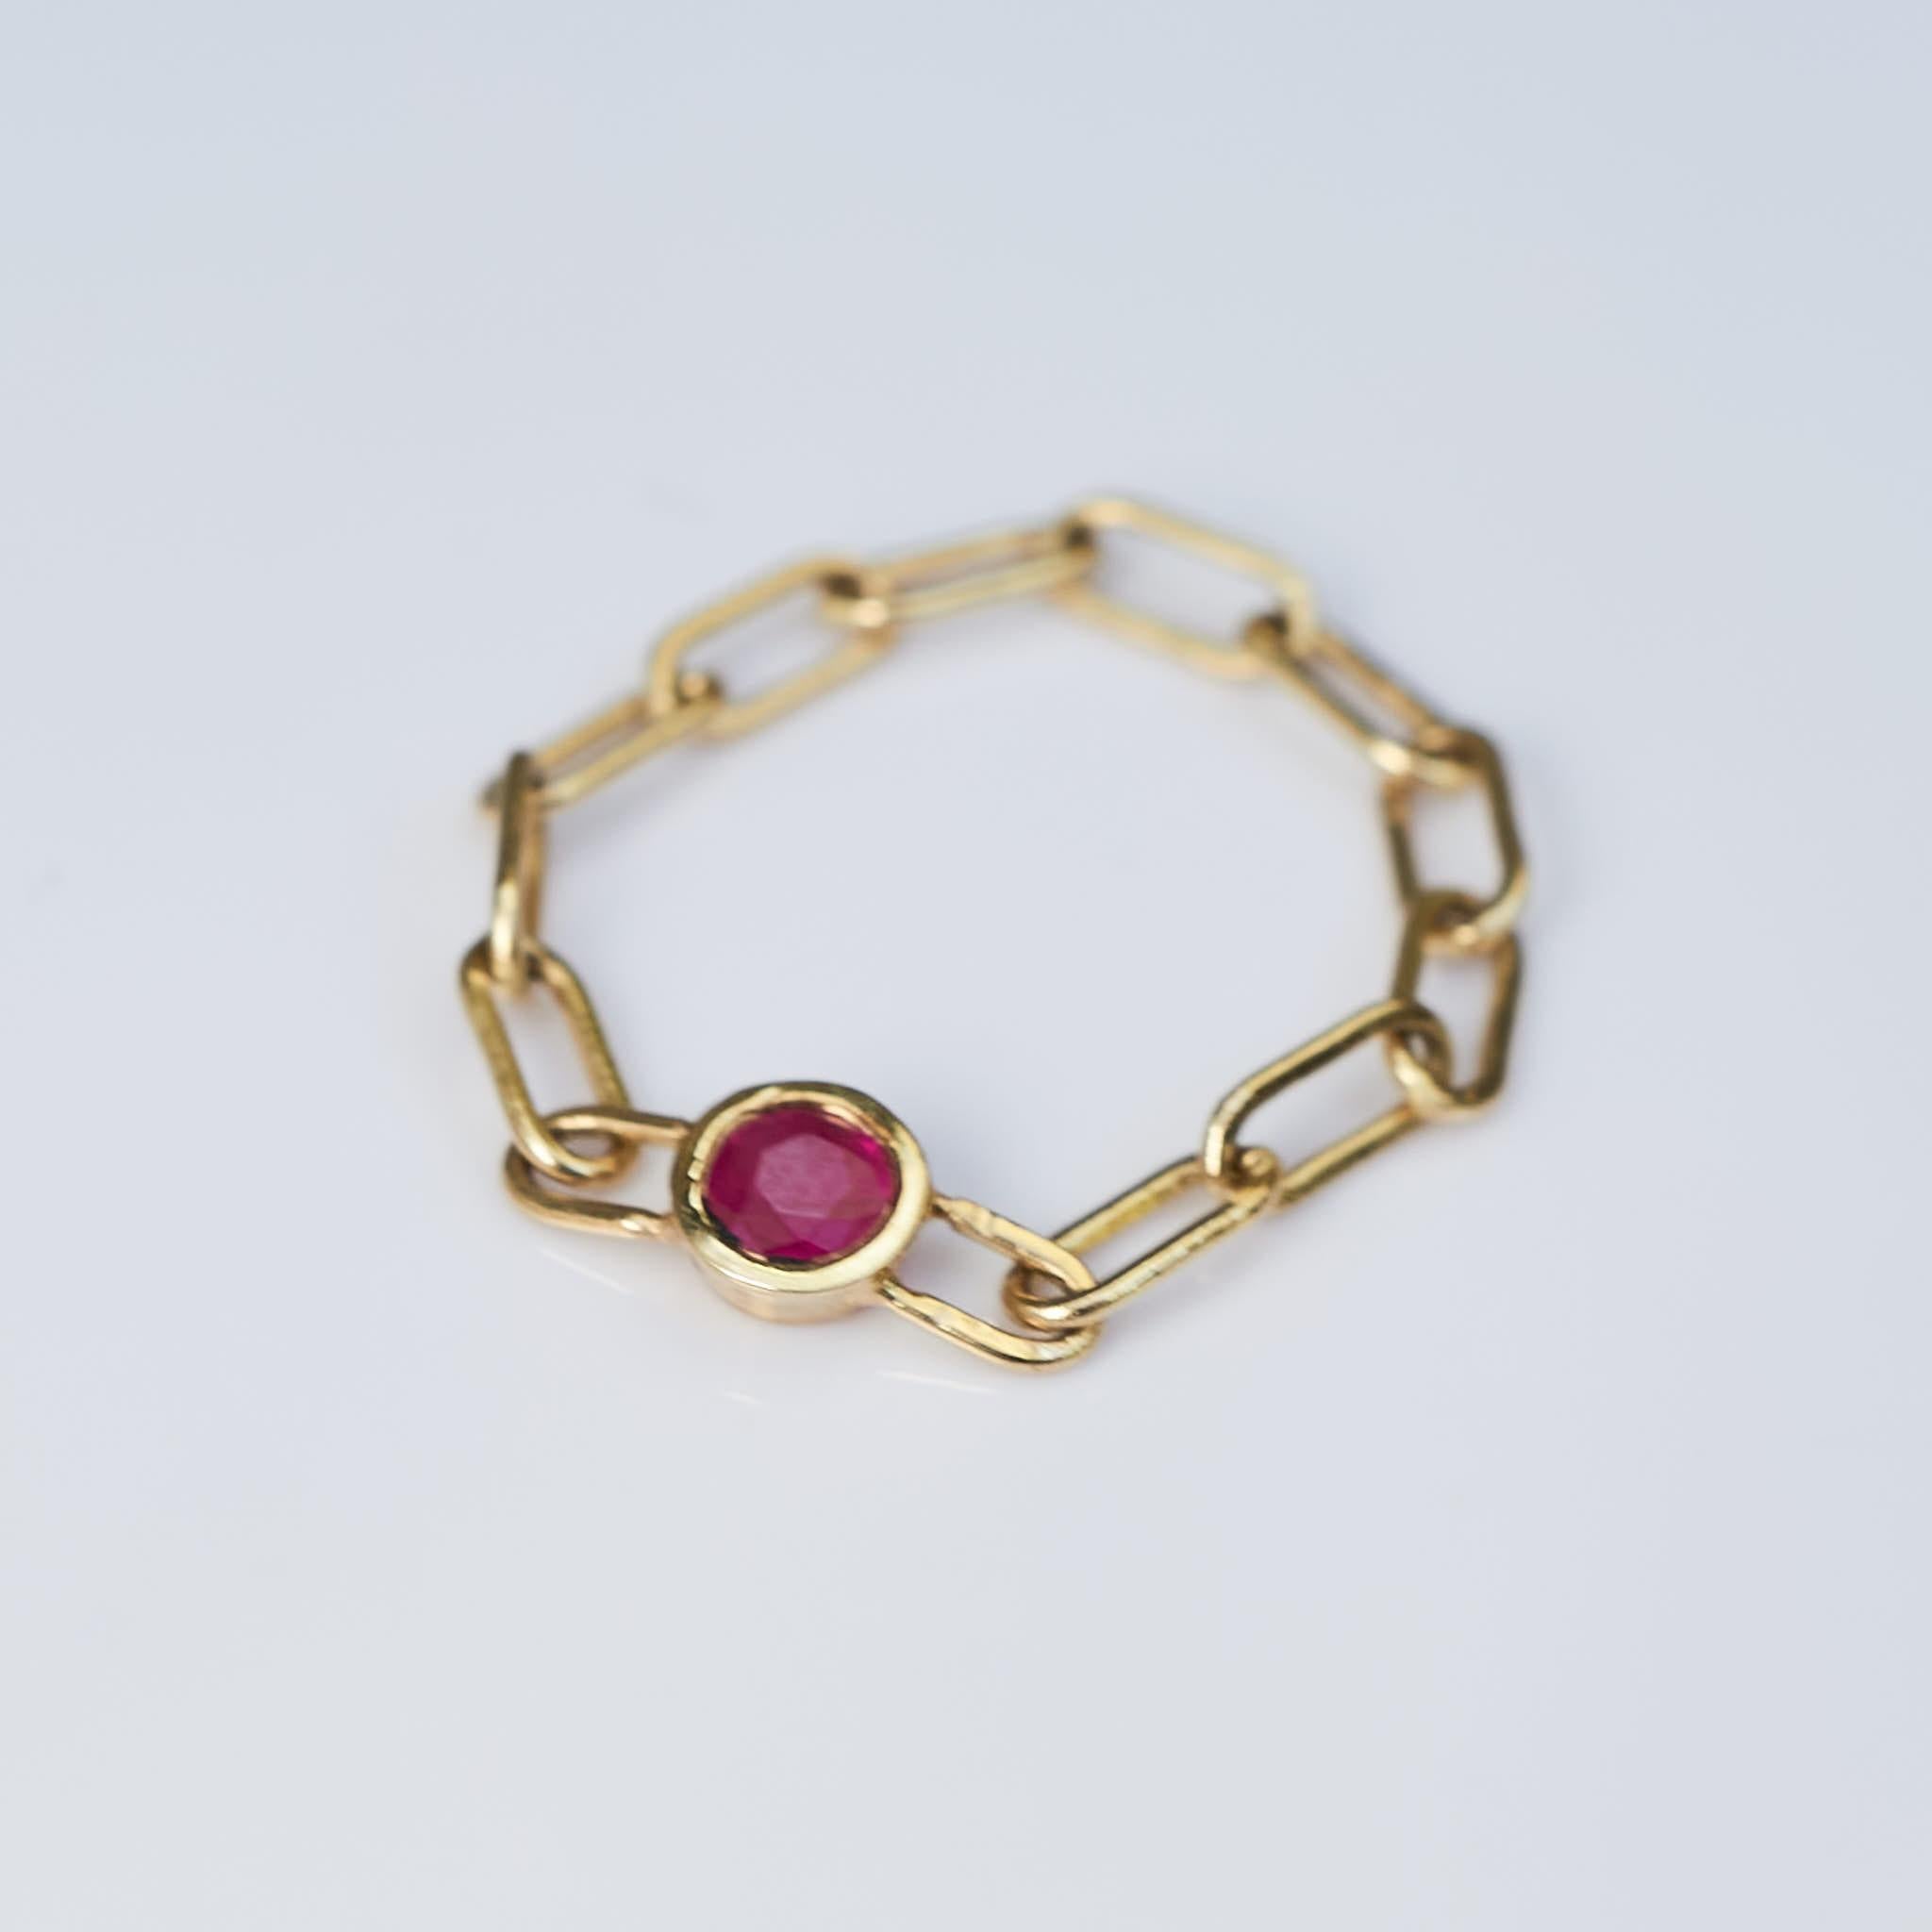 Brilliant Cut Gold Chain Ring Pink Tourmaline 14K Stack Ring J Dauphin For Sale